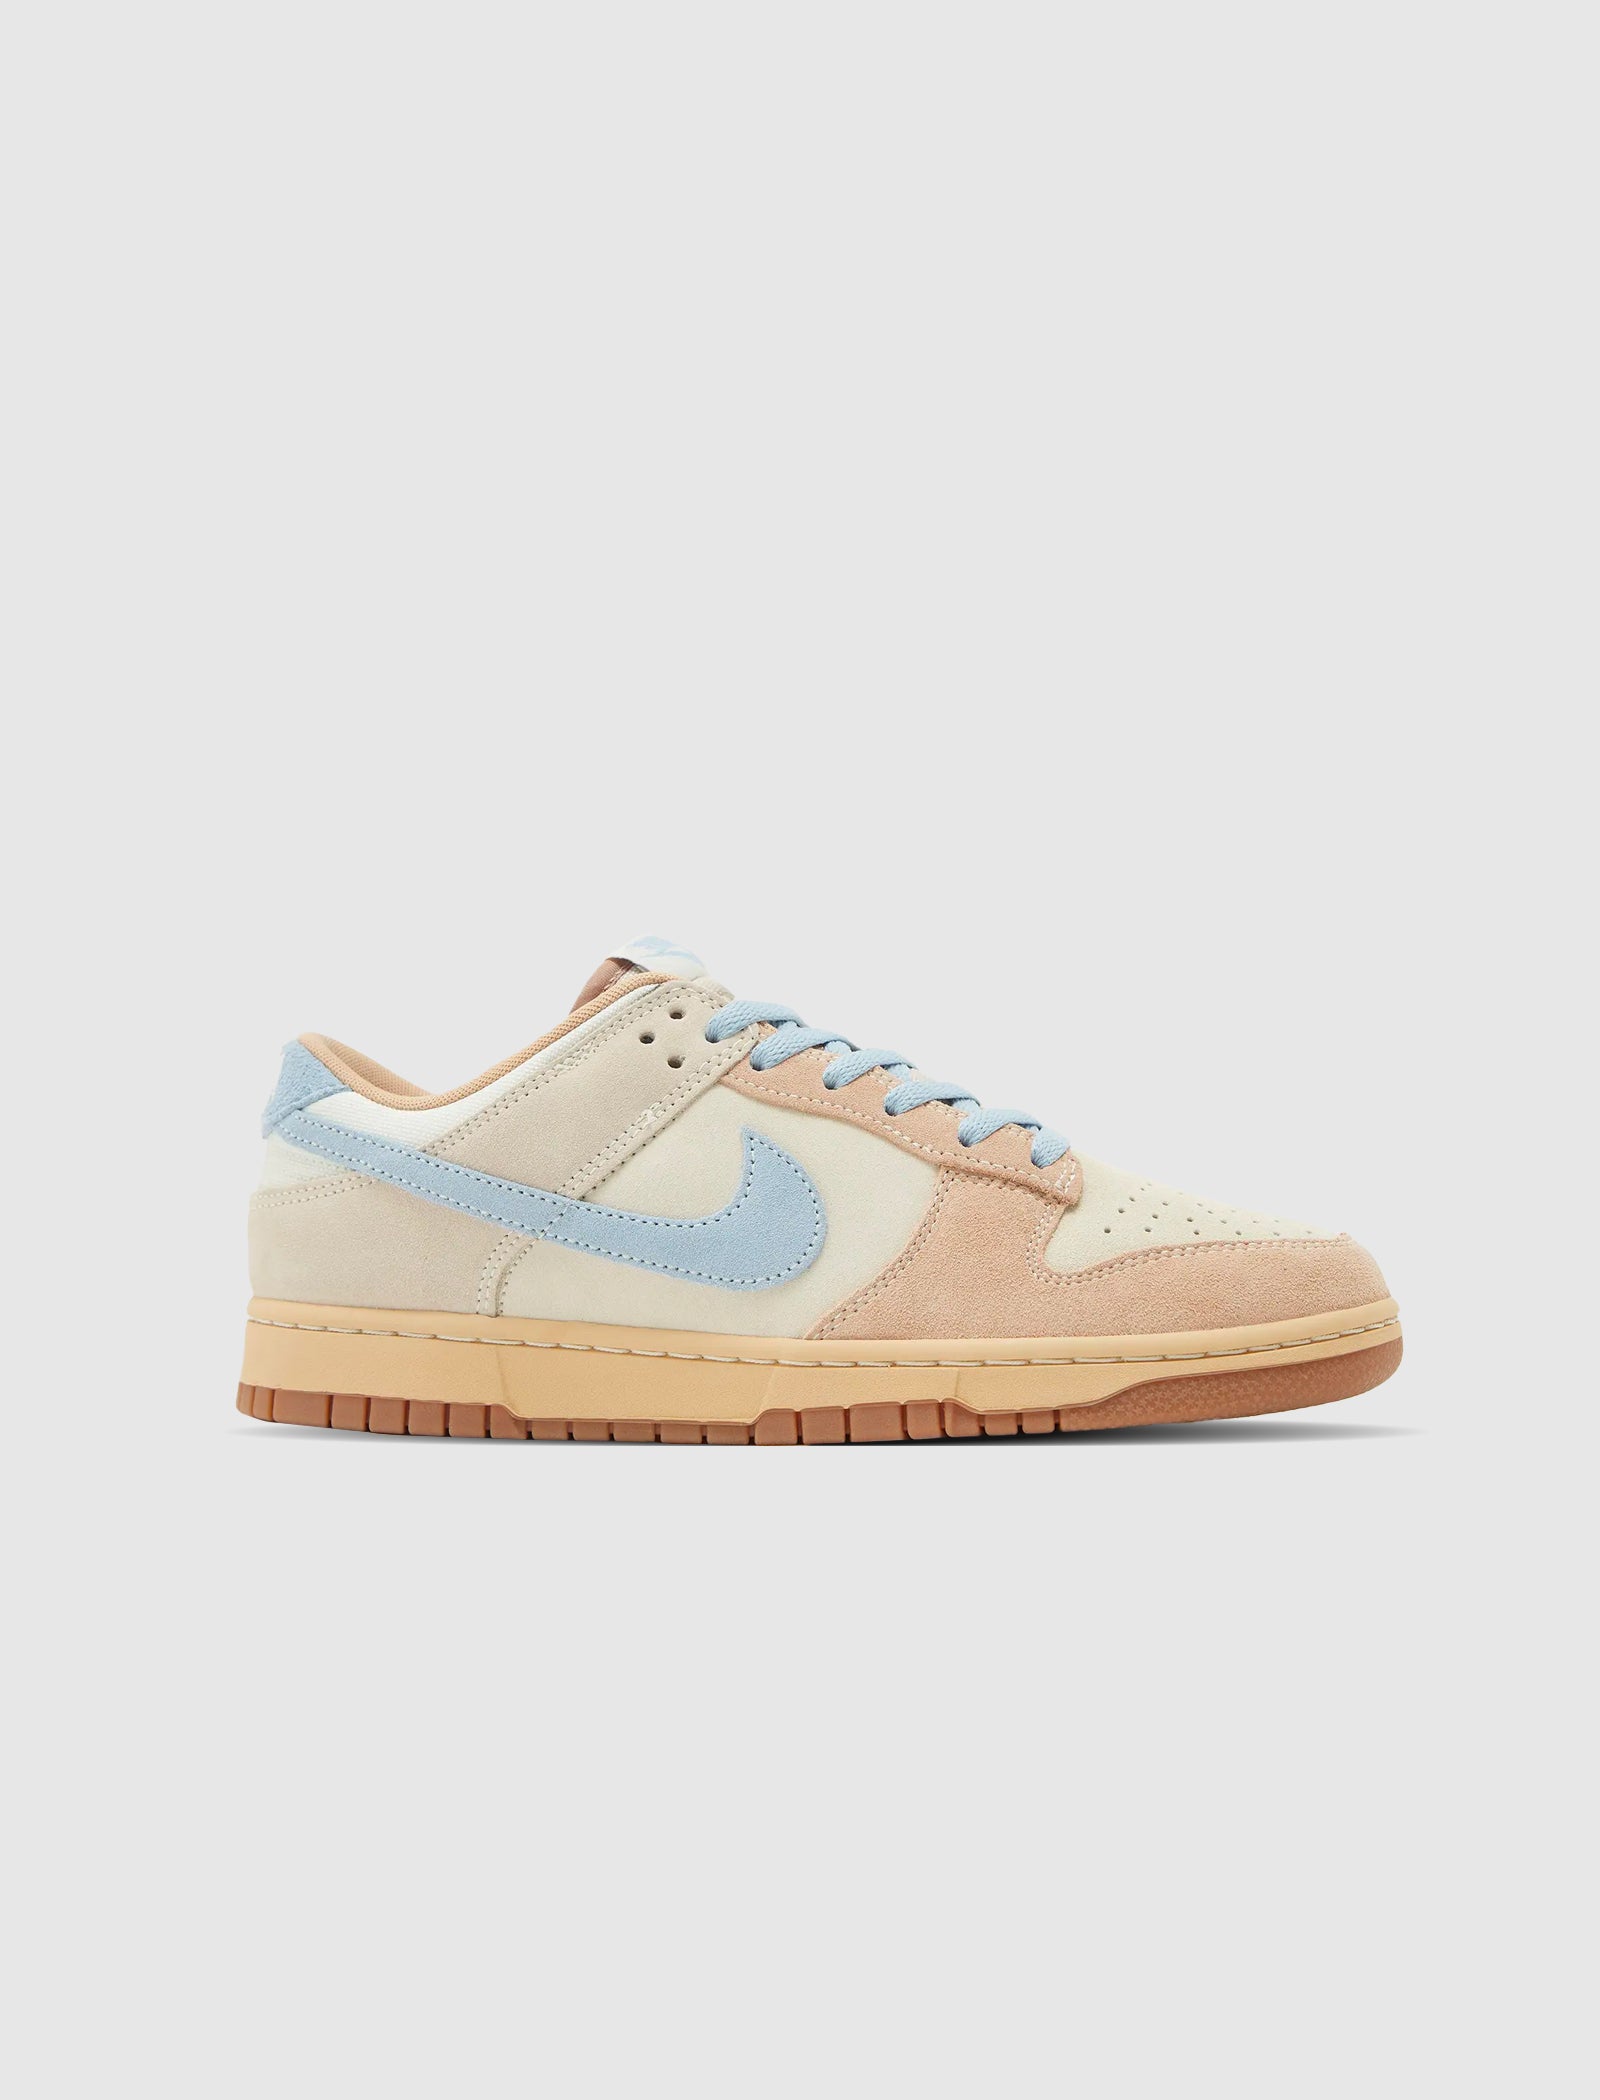 DUNK LOW "LIGHT ARMORY BLUE"